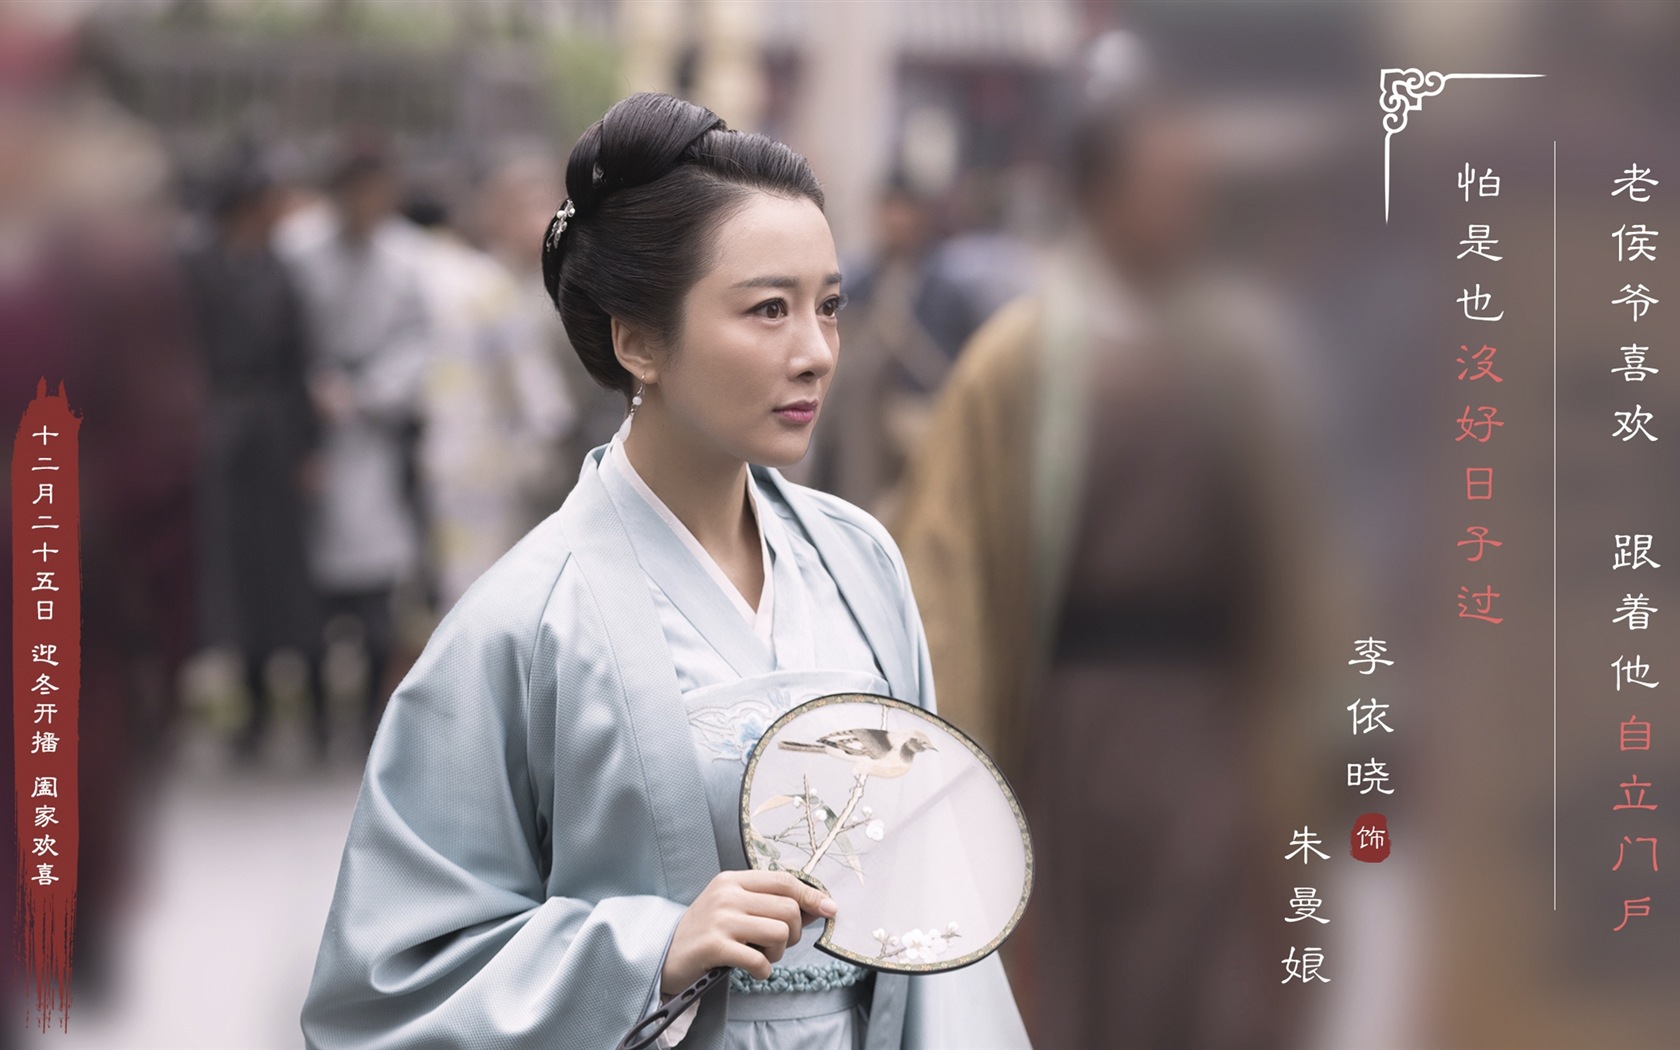 The Story Of MingLan, TV series HD wallpapers #34 - 1680x1050